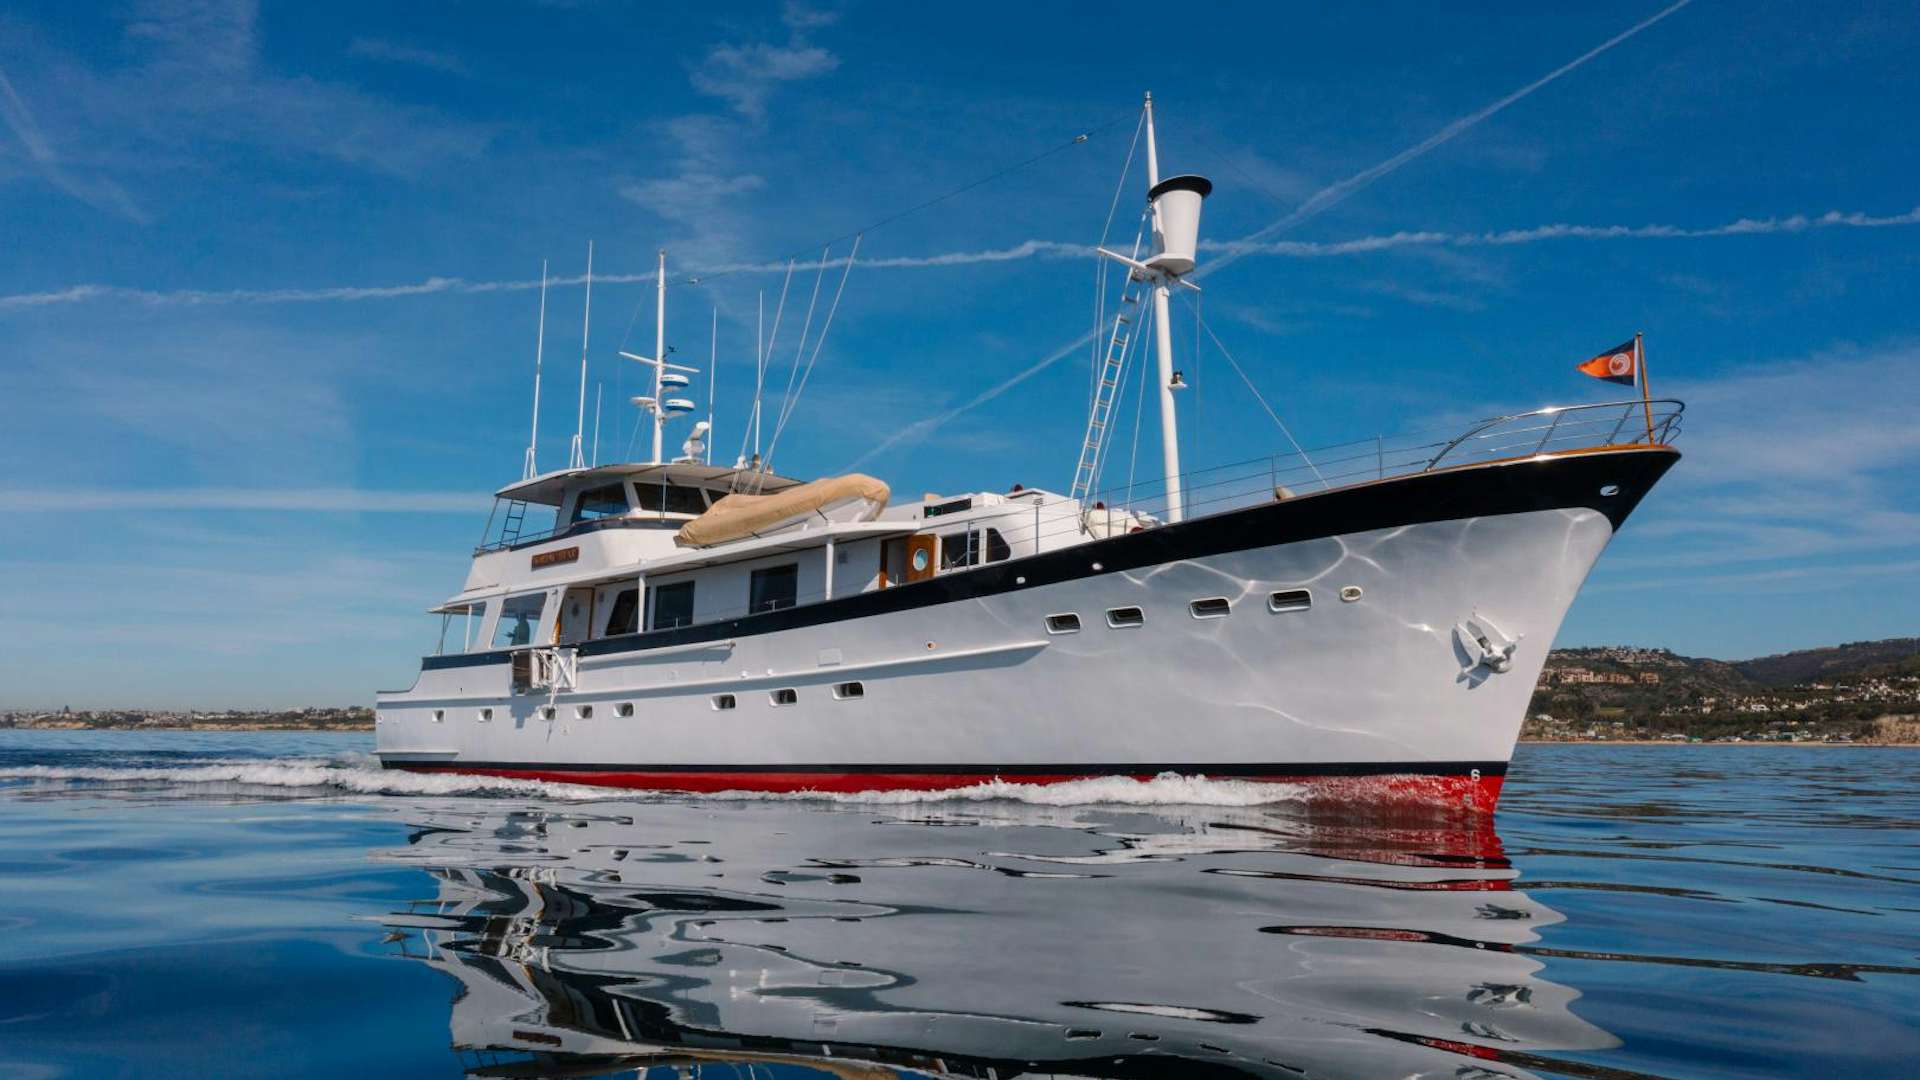 Watch Video for NORDIC STAR Yacht for Sale